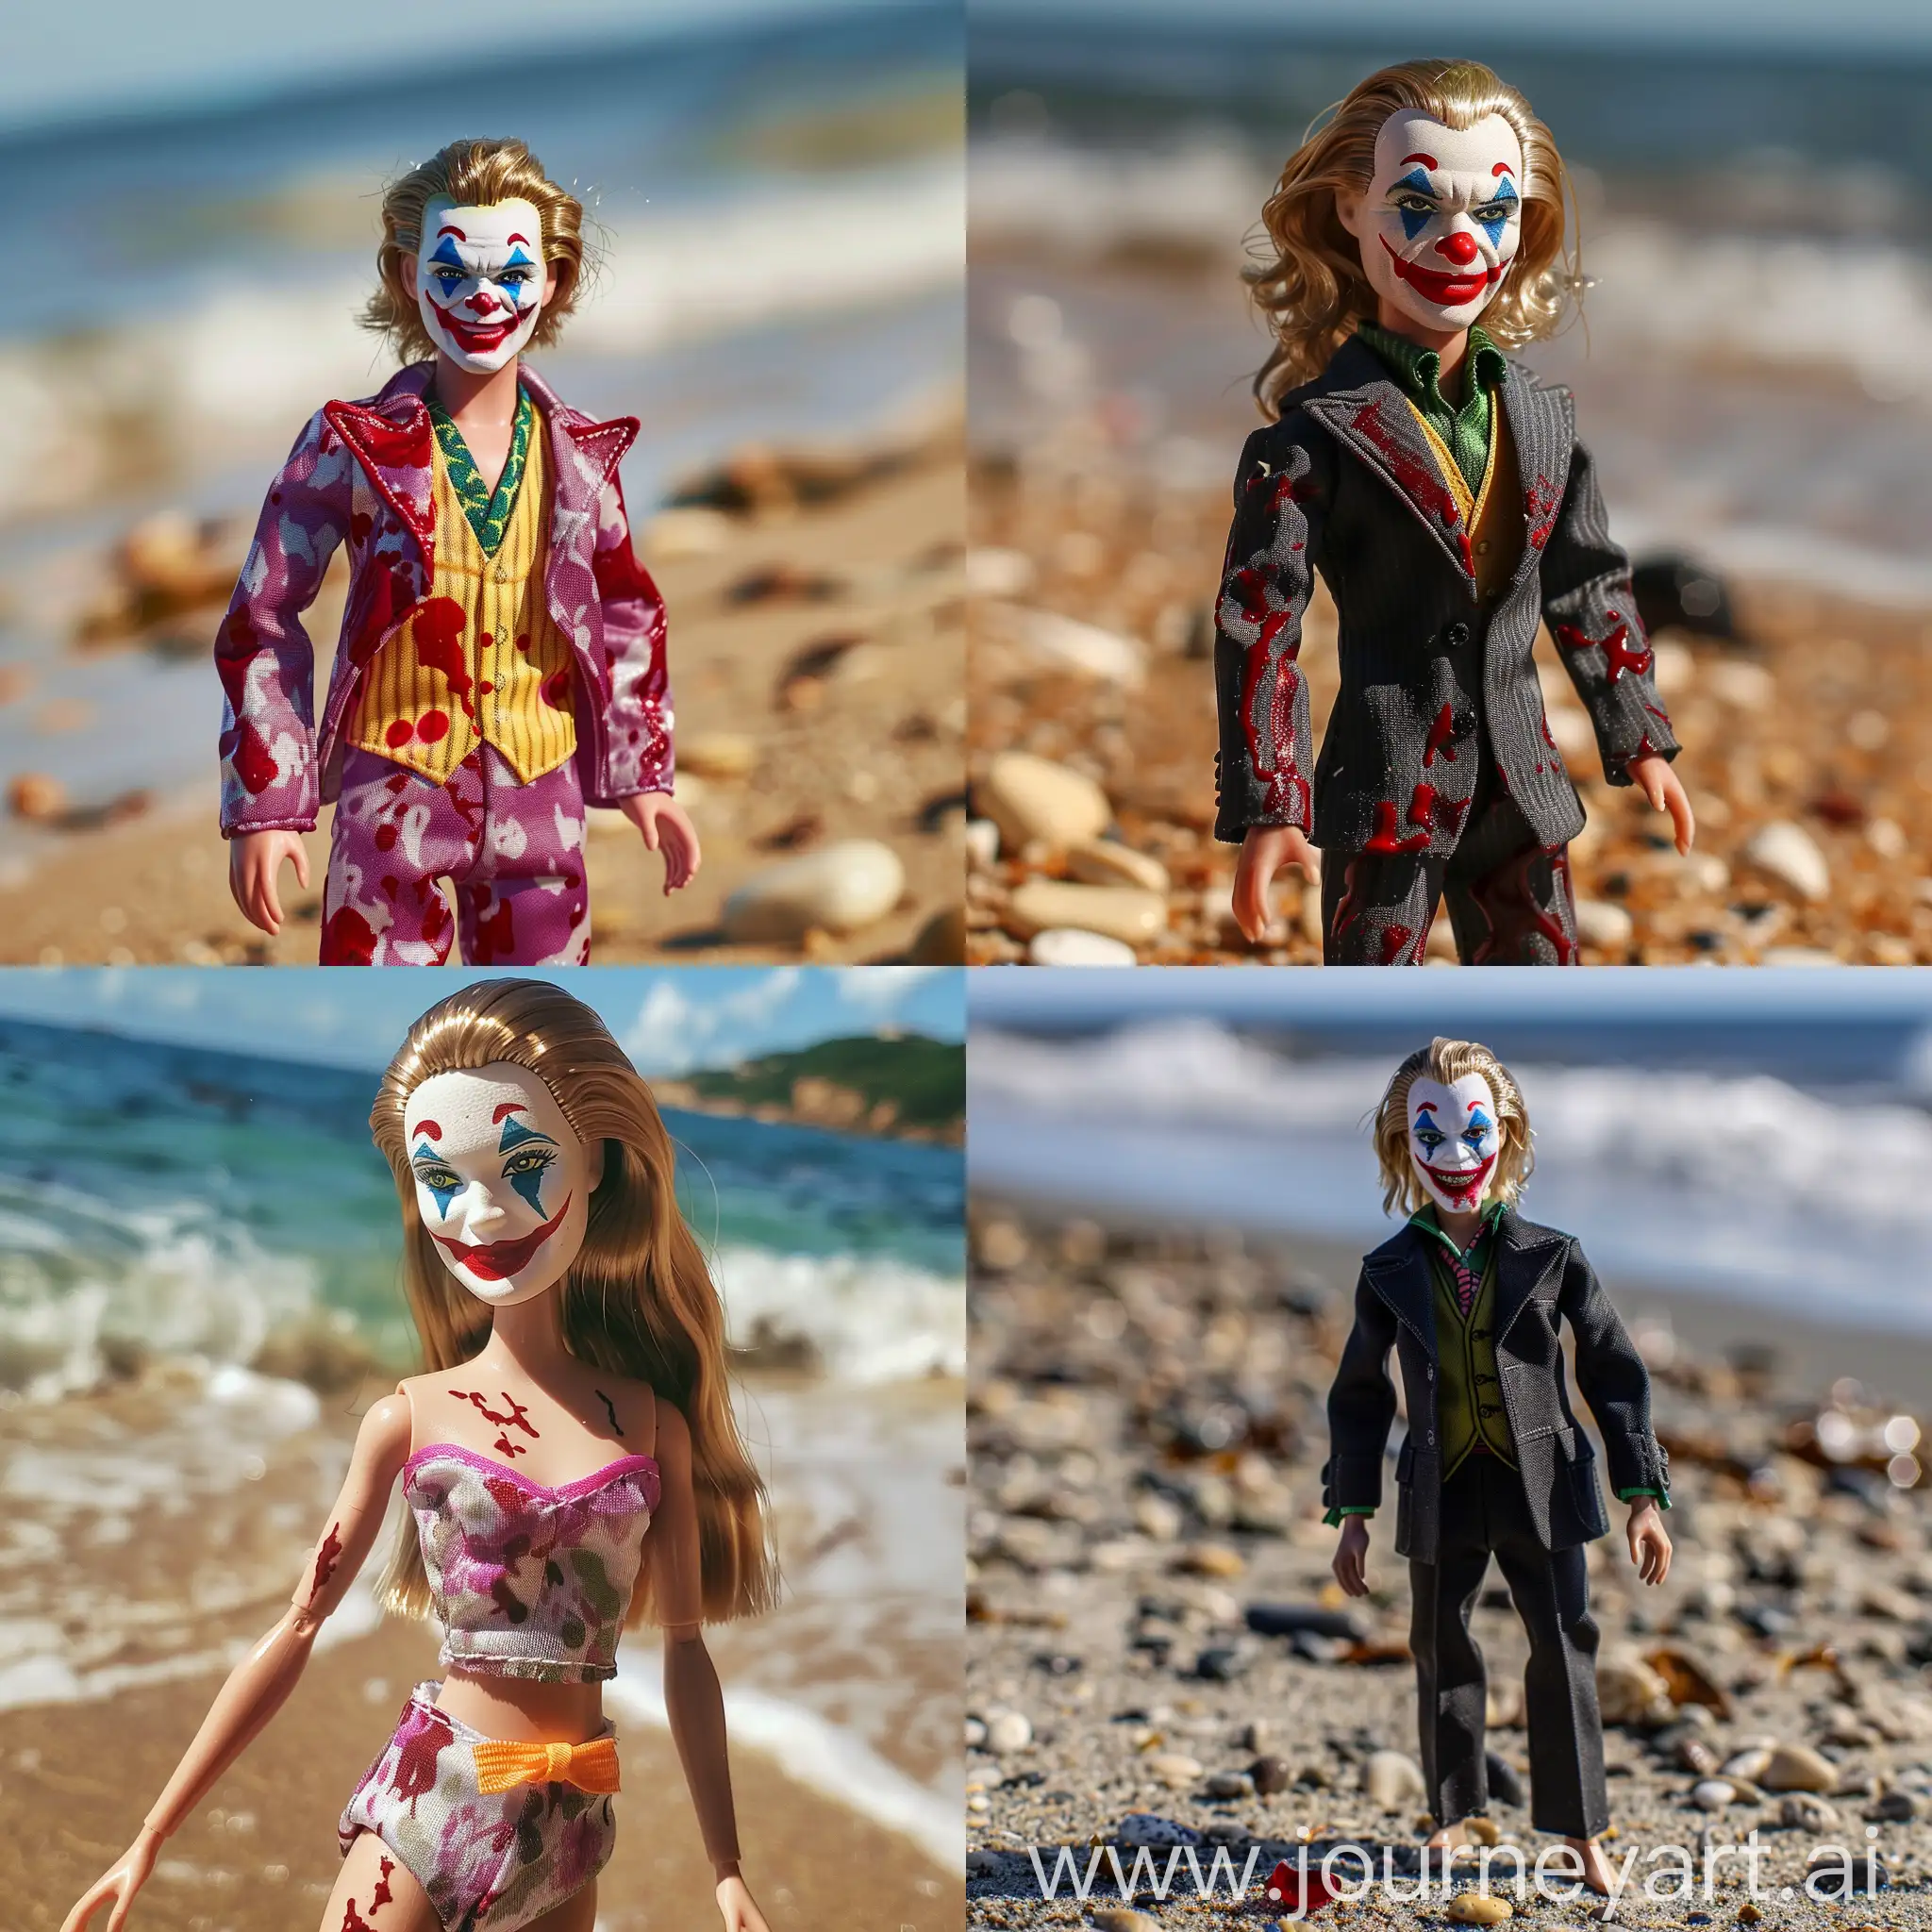 joker with blood on face barbie suit on beach